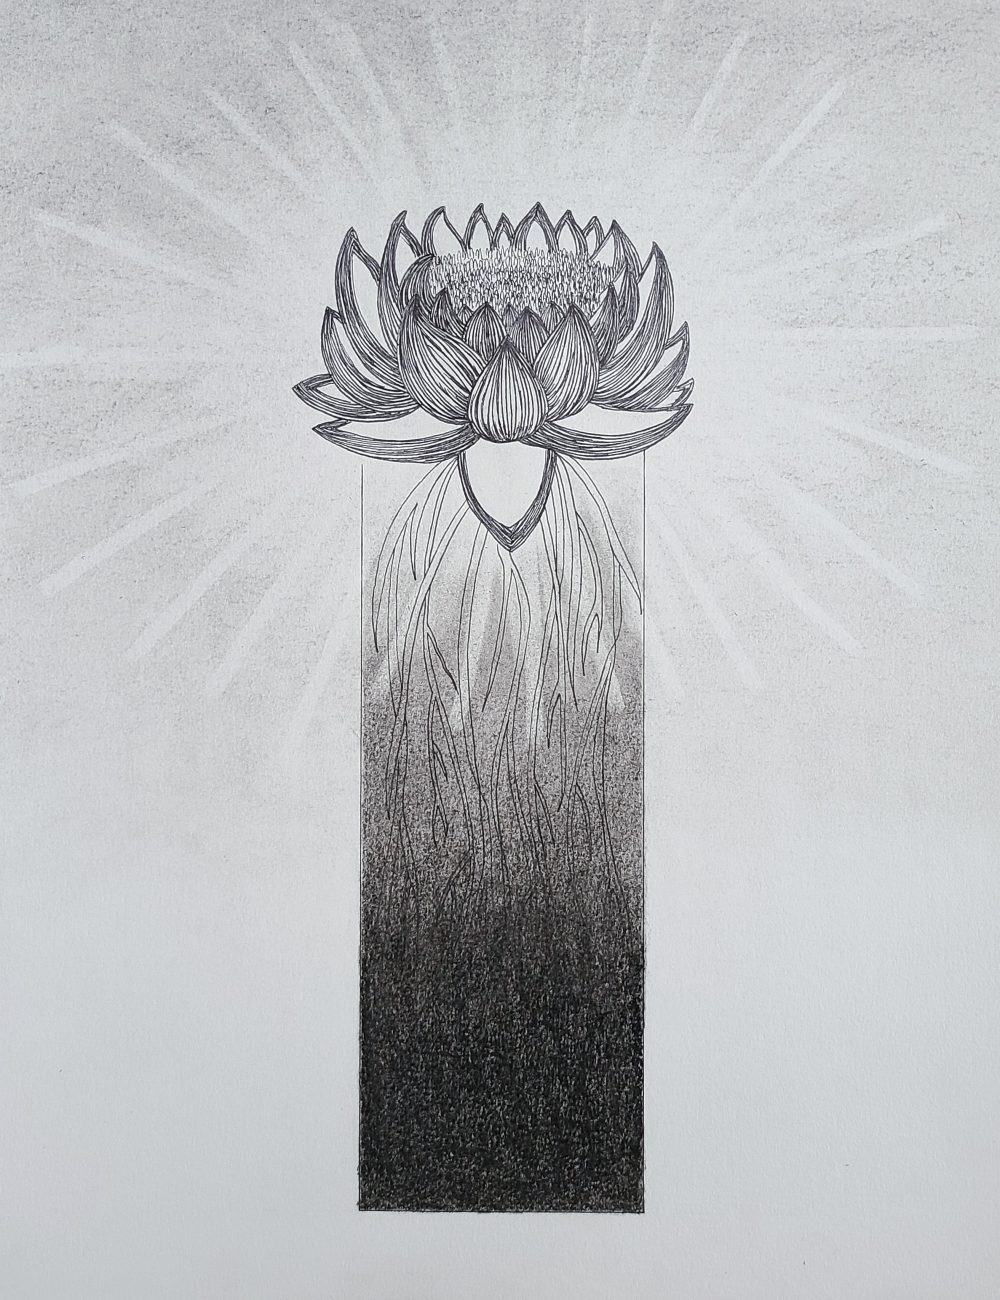 A black and white mixed media drawing of a lotus flower breaking free from the confinement of a box with light rays radiating from the center of the flower.